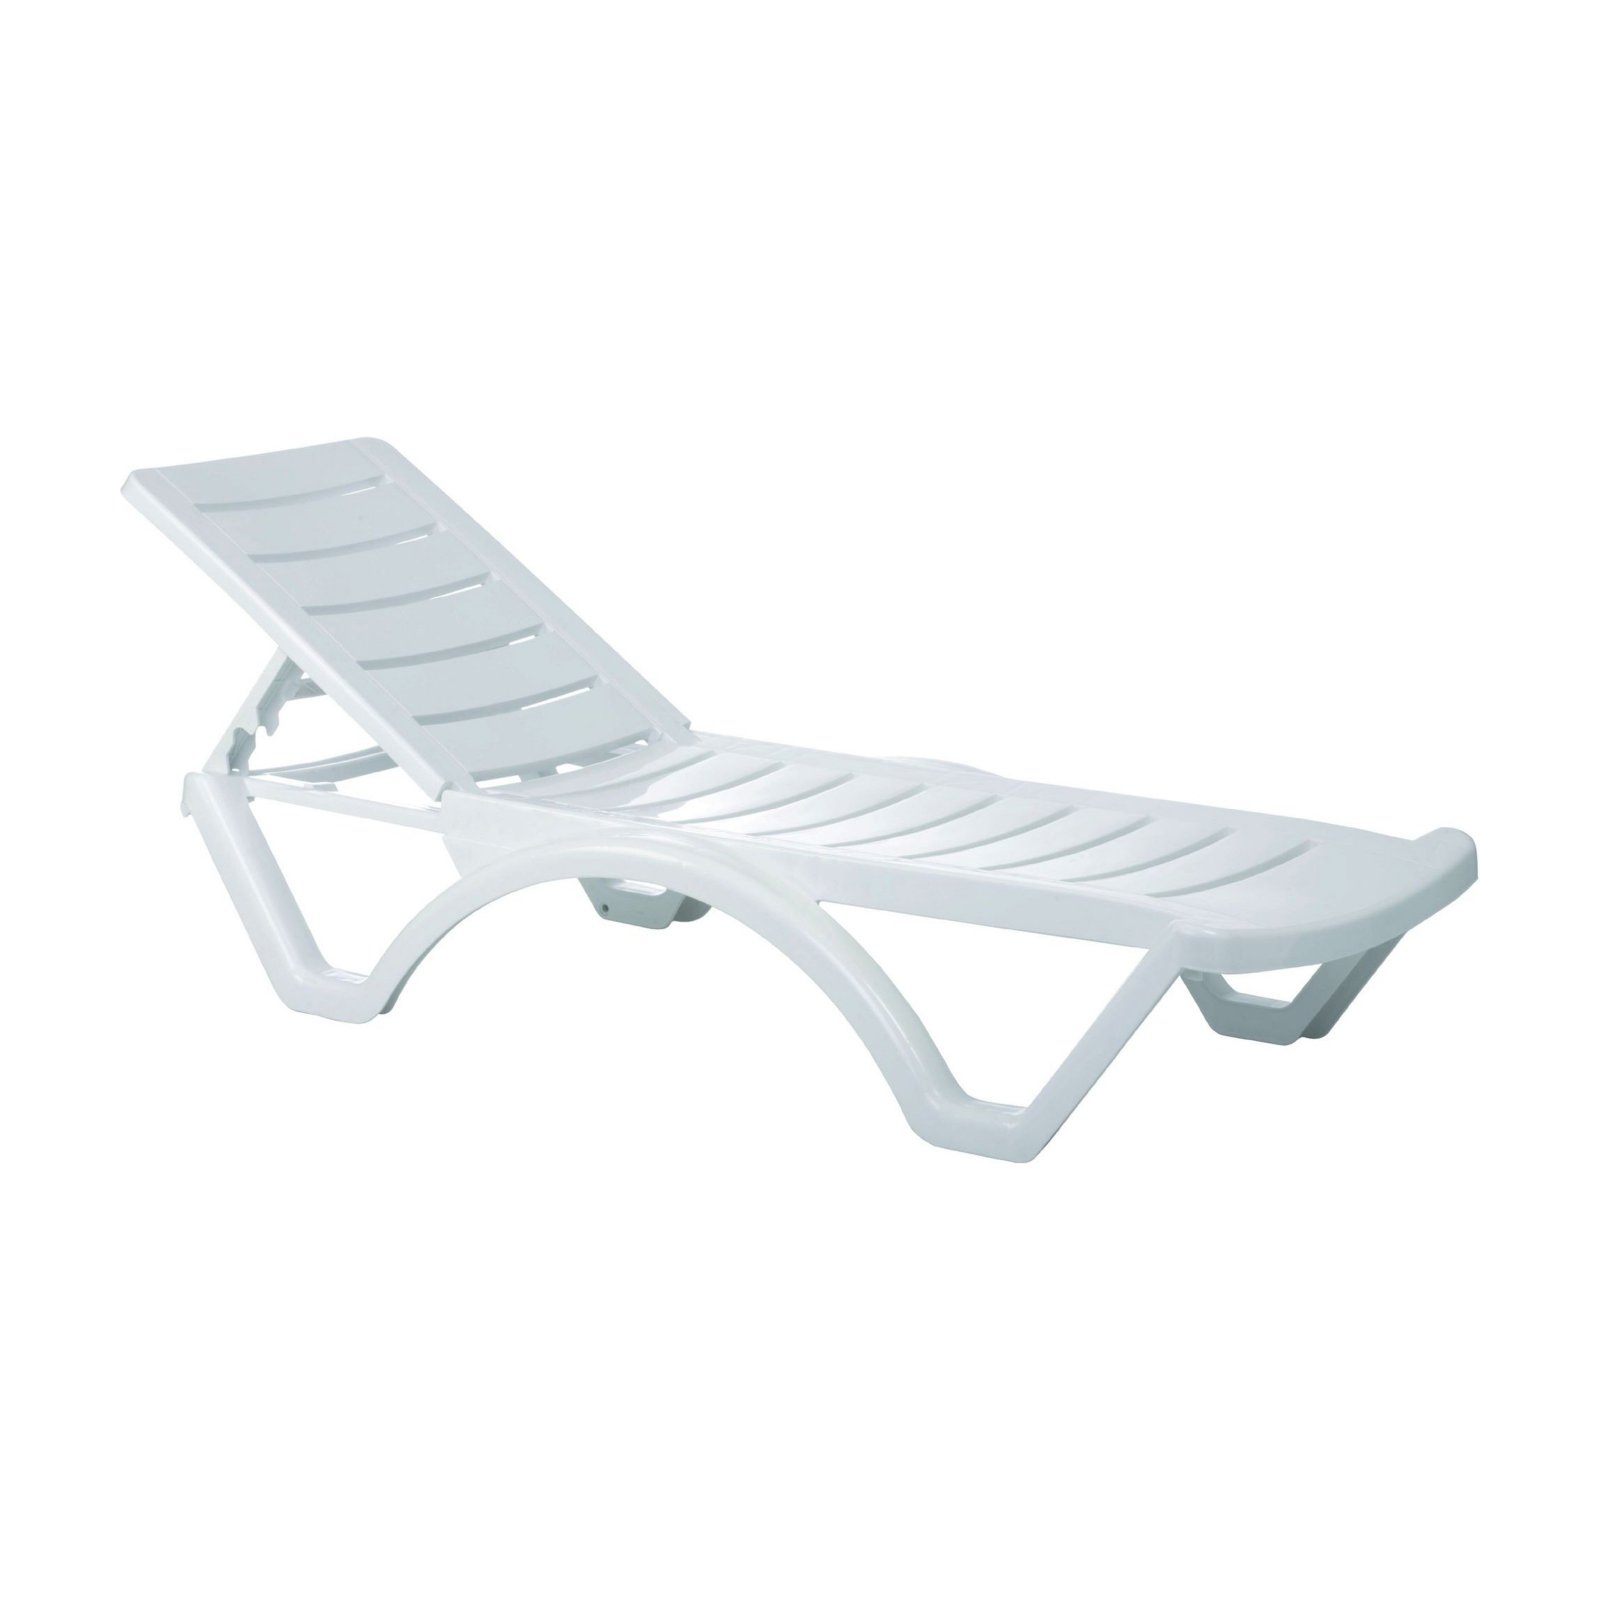 Compamia Aqua Modern Resin Pool Chaise Lounge in White Finish - image 1 of 9